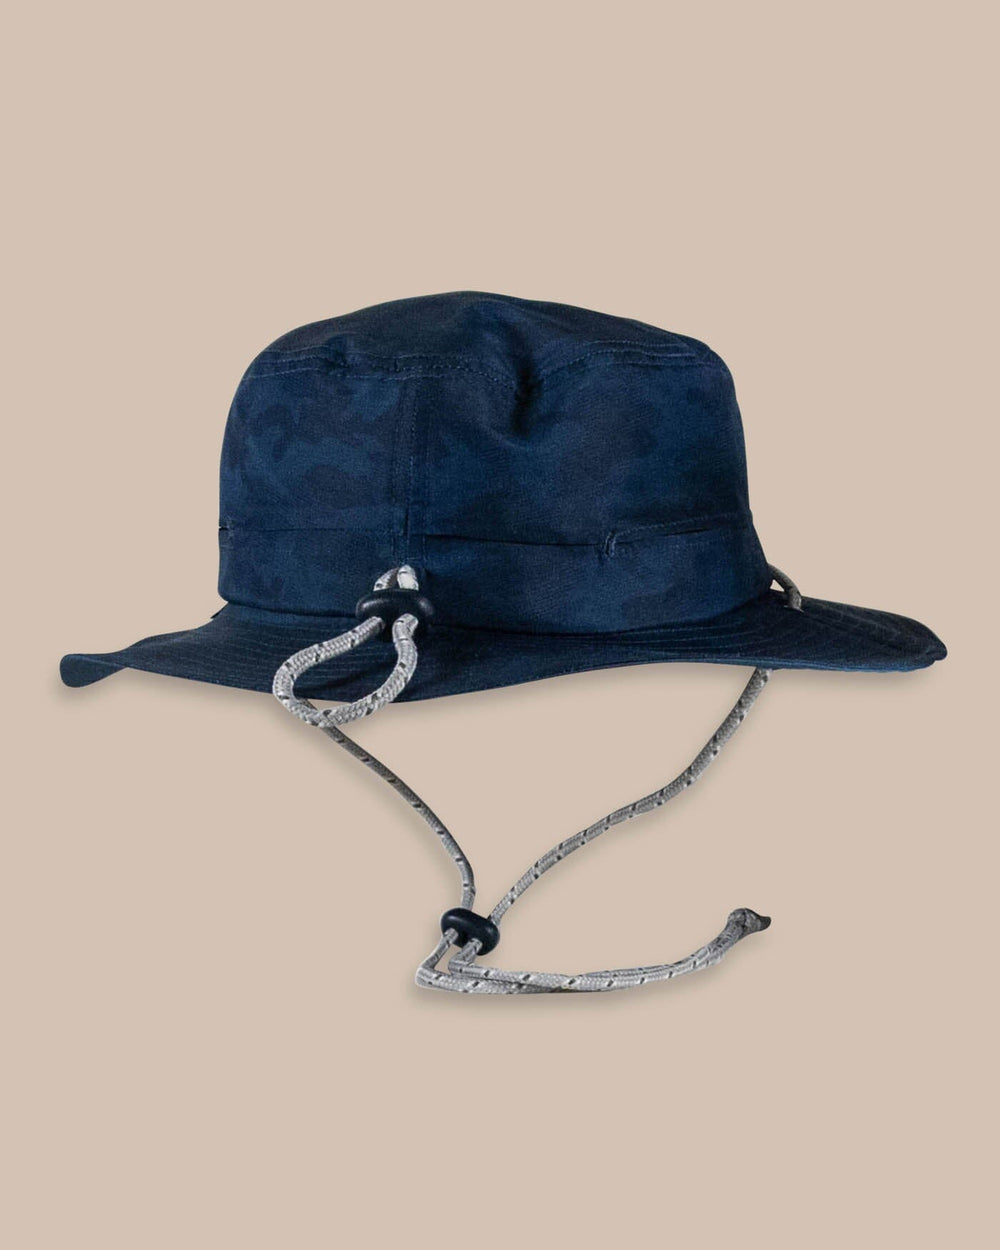 The back view of the Southern Tide Waterway Camo Print Performance Sun Hat by Southern Tide - True Navy